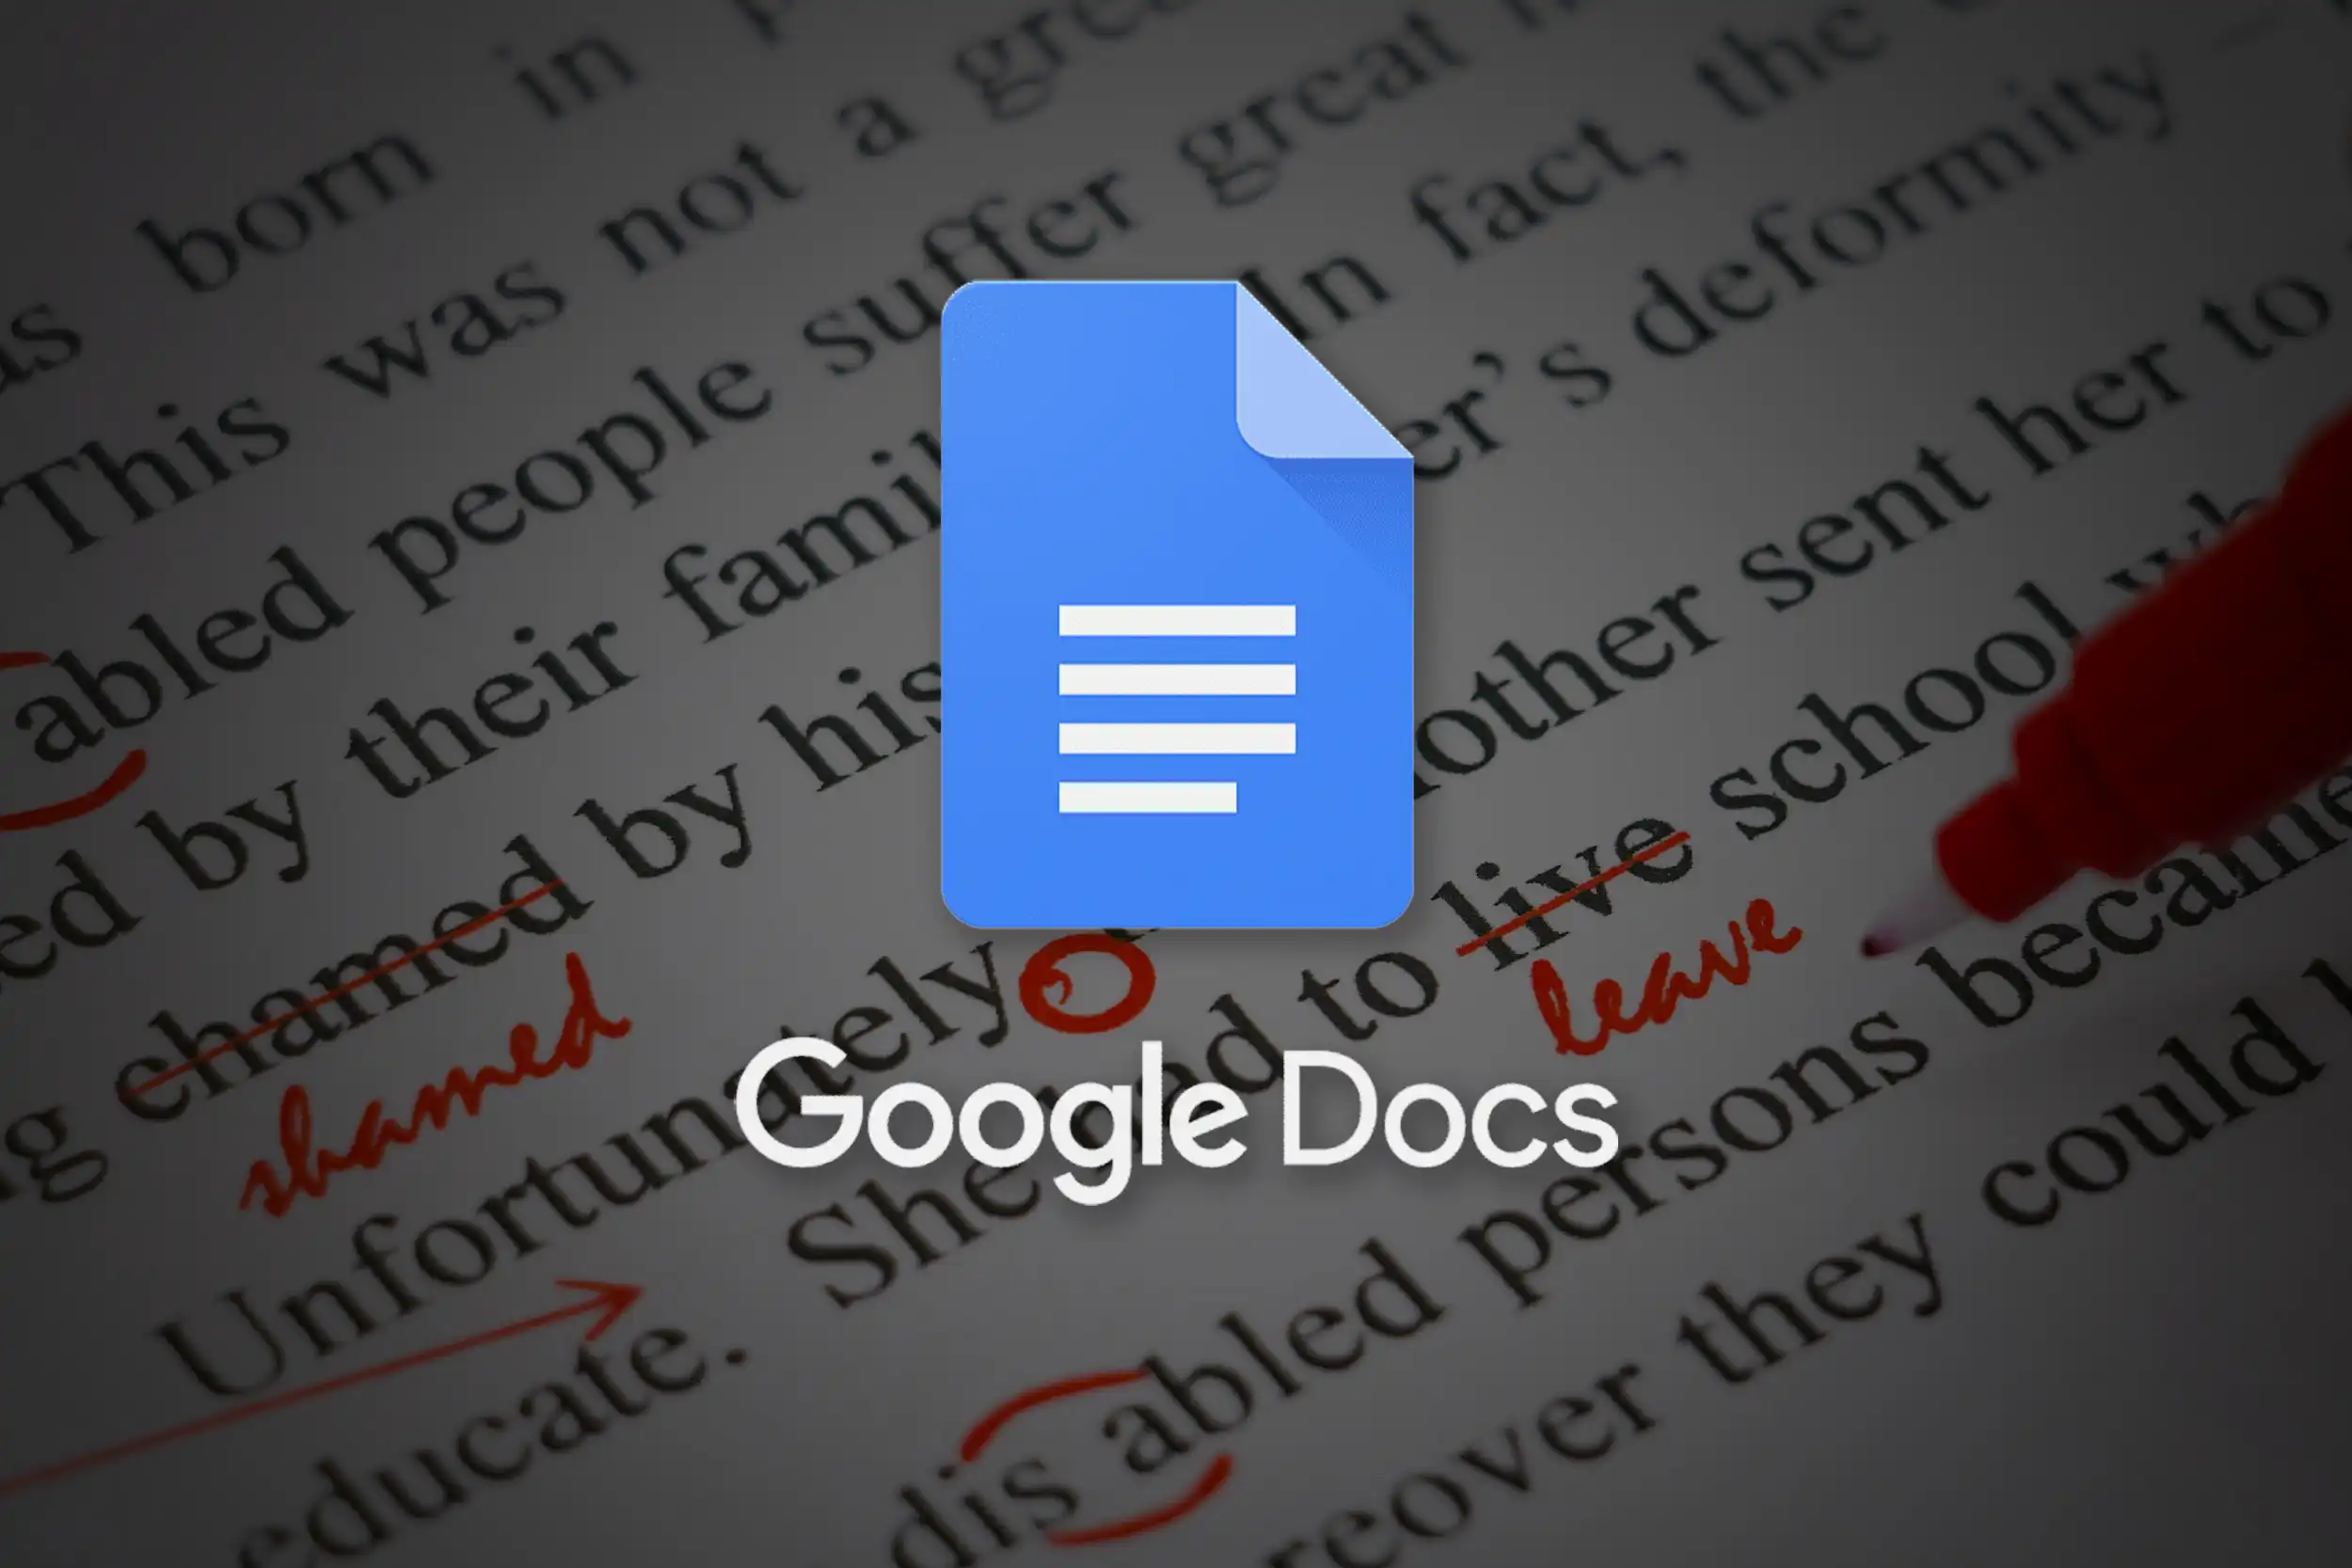 Features of Google Docs in Microsoft Word web application